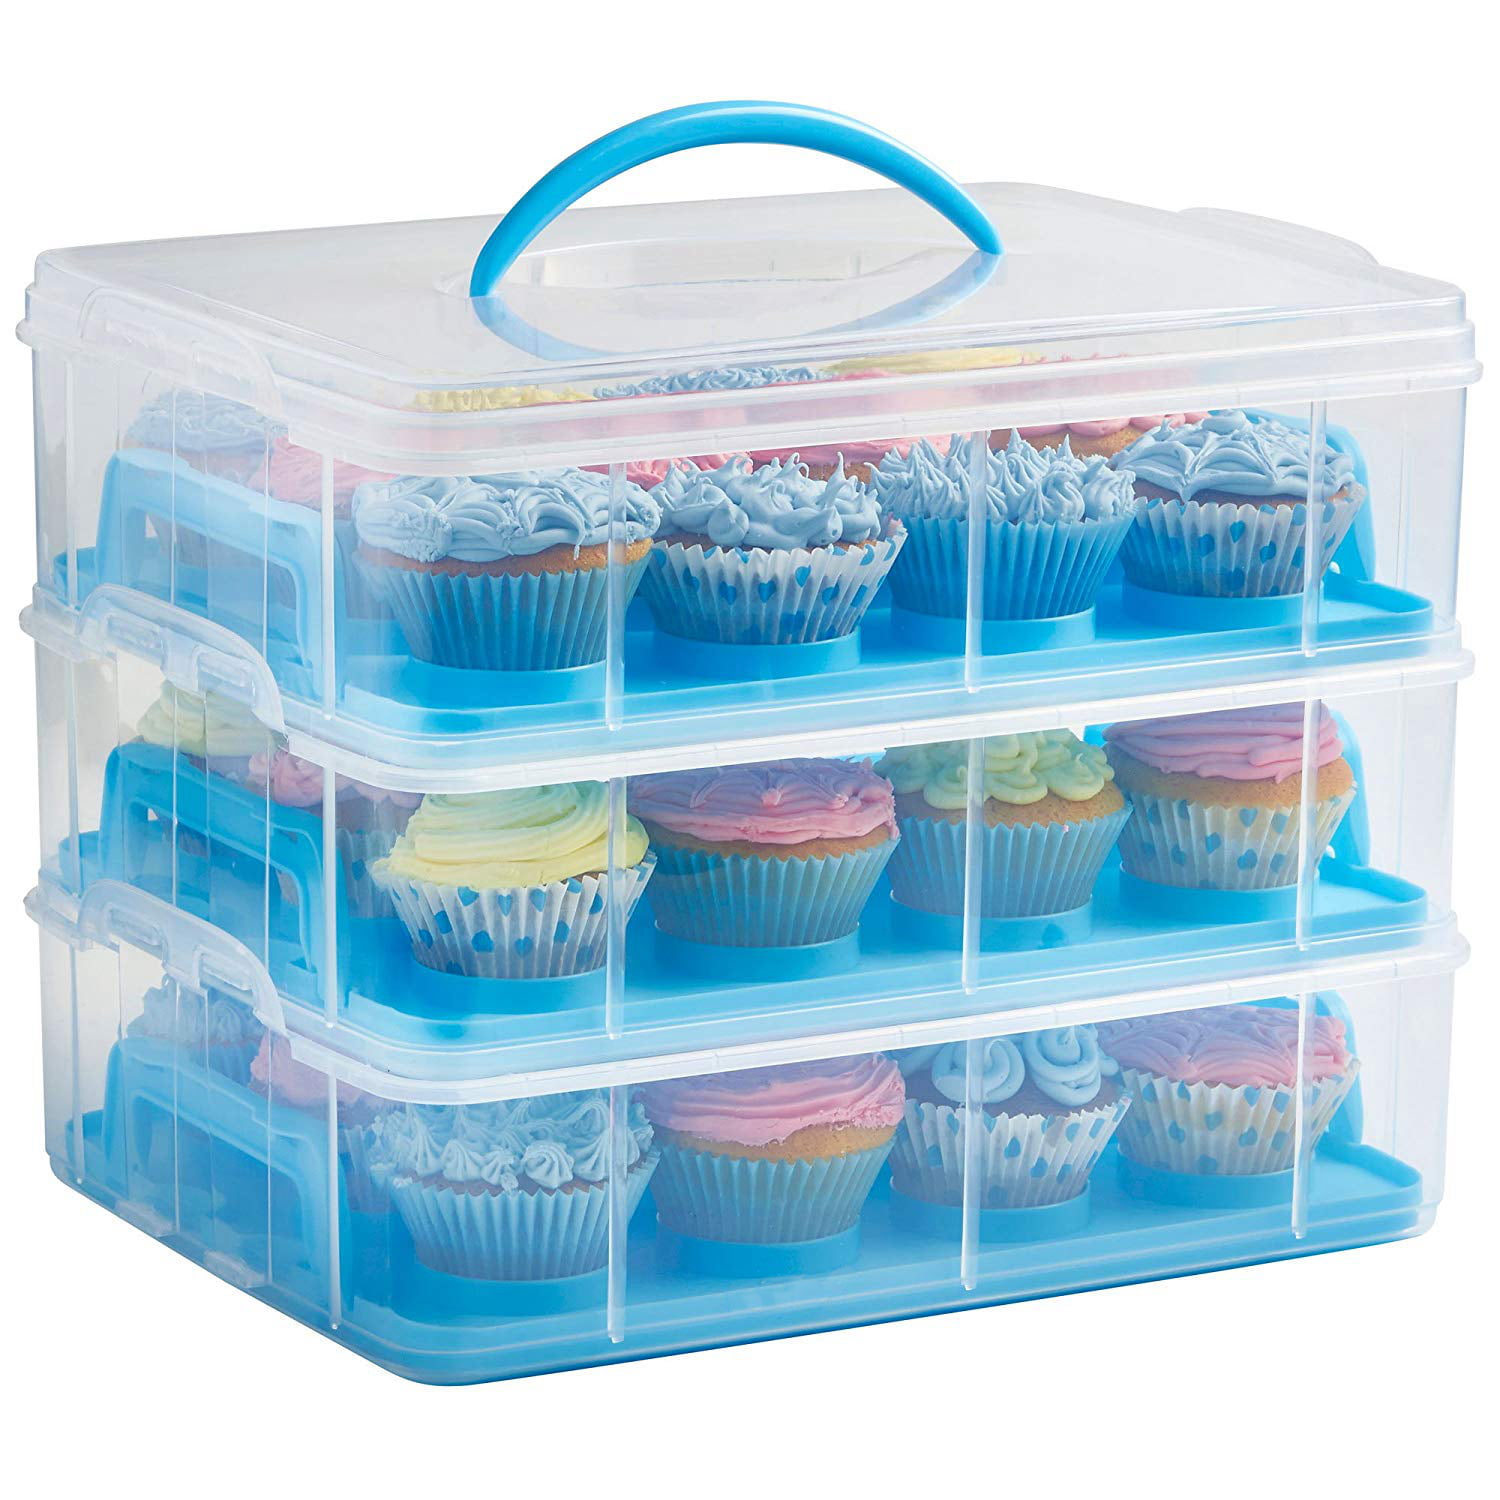 Portable 3 Tier 36 Cupcake Cake Holder Carrier Tray Handle Safe BPA Free Plastic 